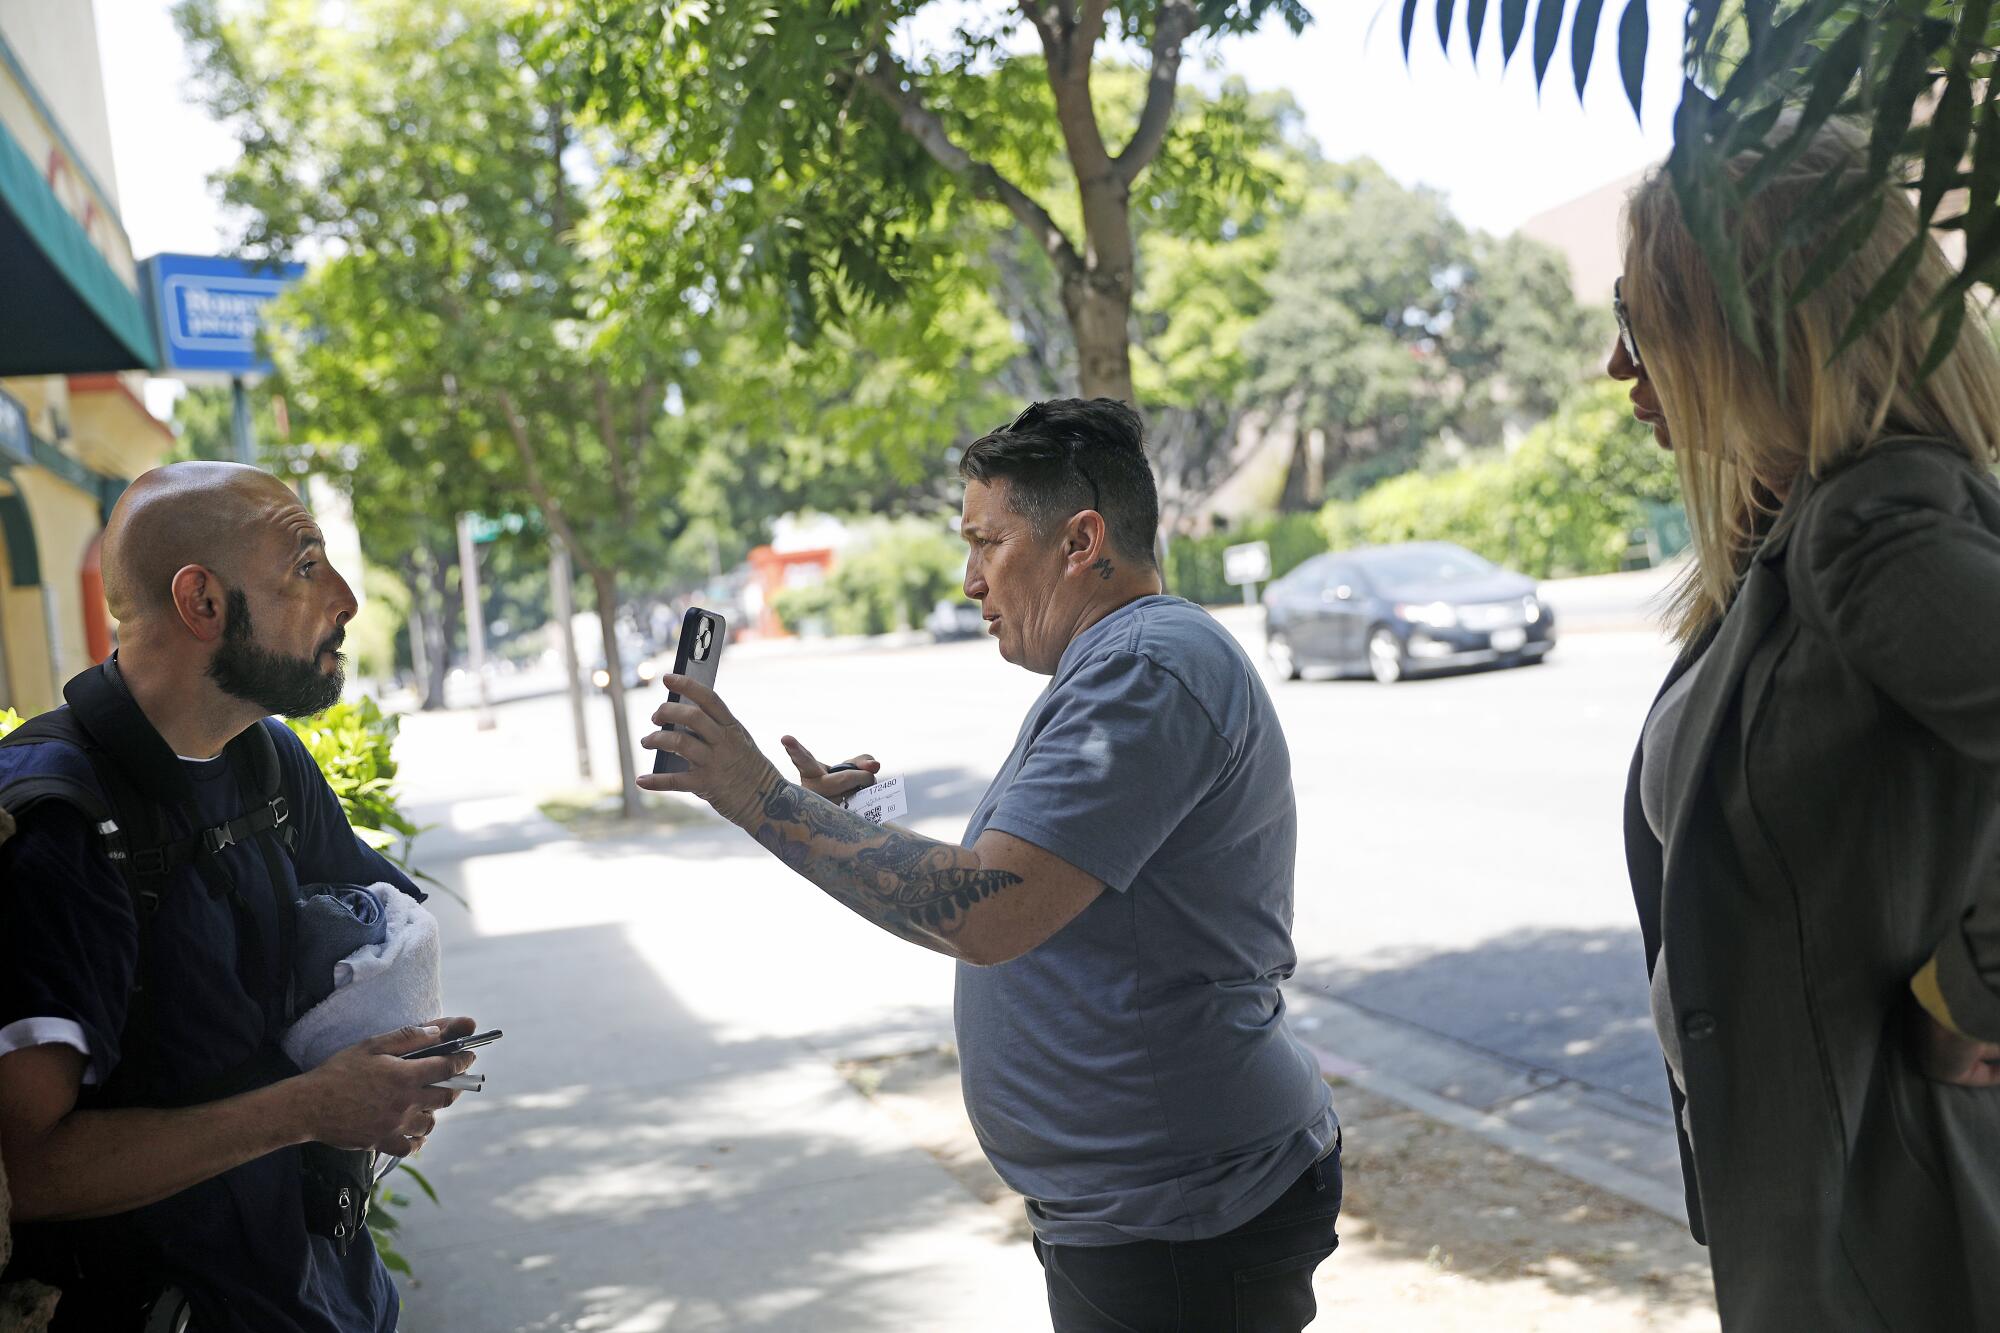 A man shows a photo of Sherry Hill's daughter to another man, standing outside of a motel.